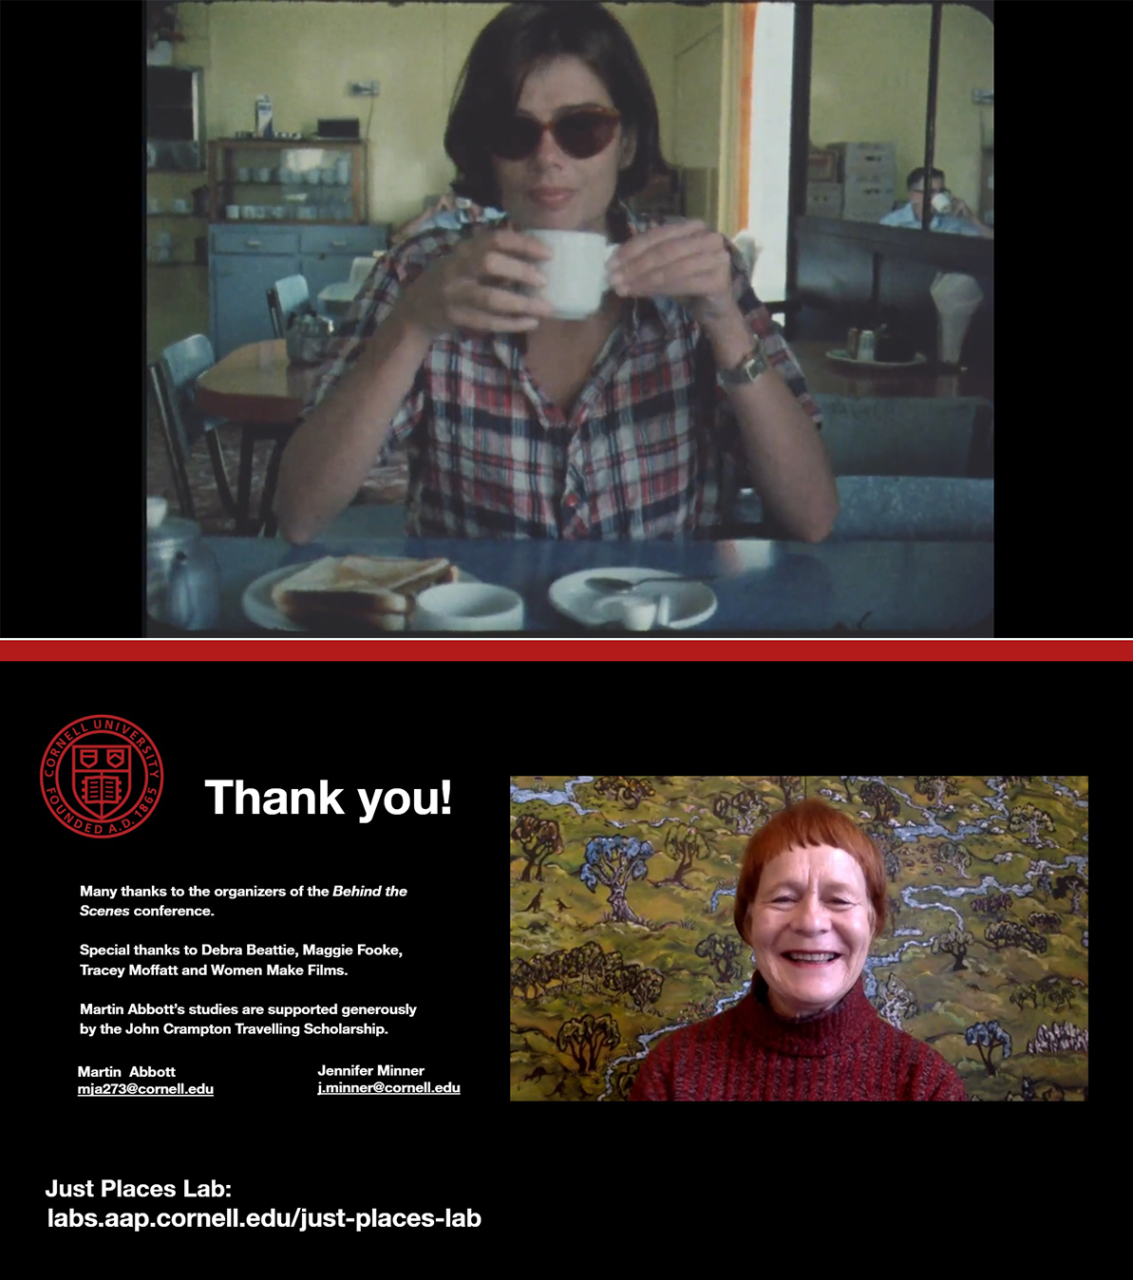 Two images. On the top is an image of the director Debra Beattie in her film Expo Schmexpo. On the bottom is a slide from Martin Abbott and Jennifer Minner's presentation.